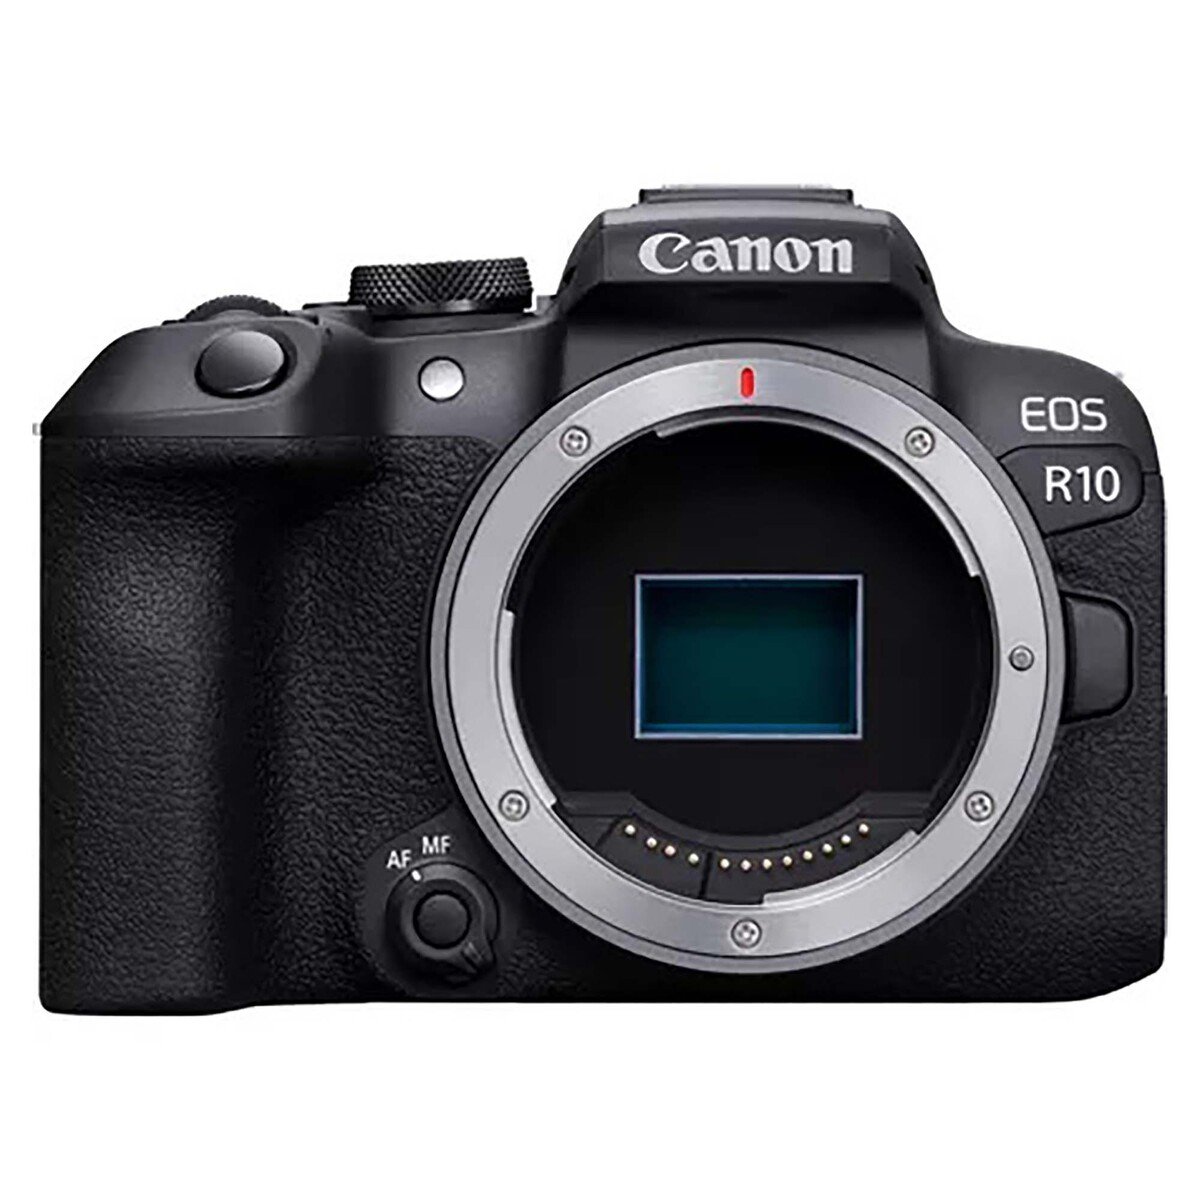 Canon EOS R10 Mirrorless Camera With RF-S18-45mm Lens